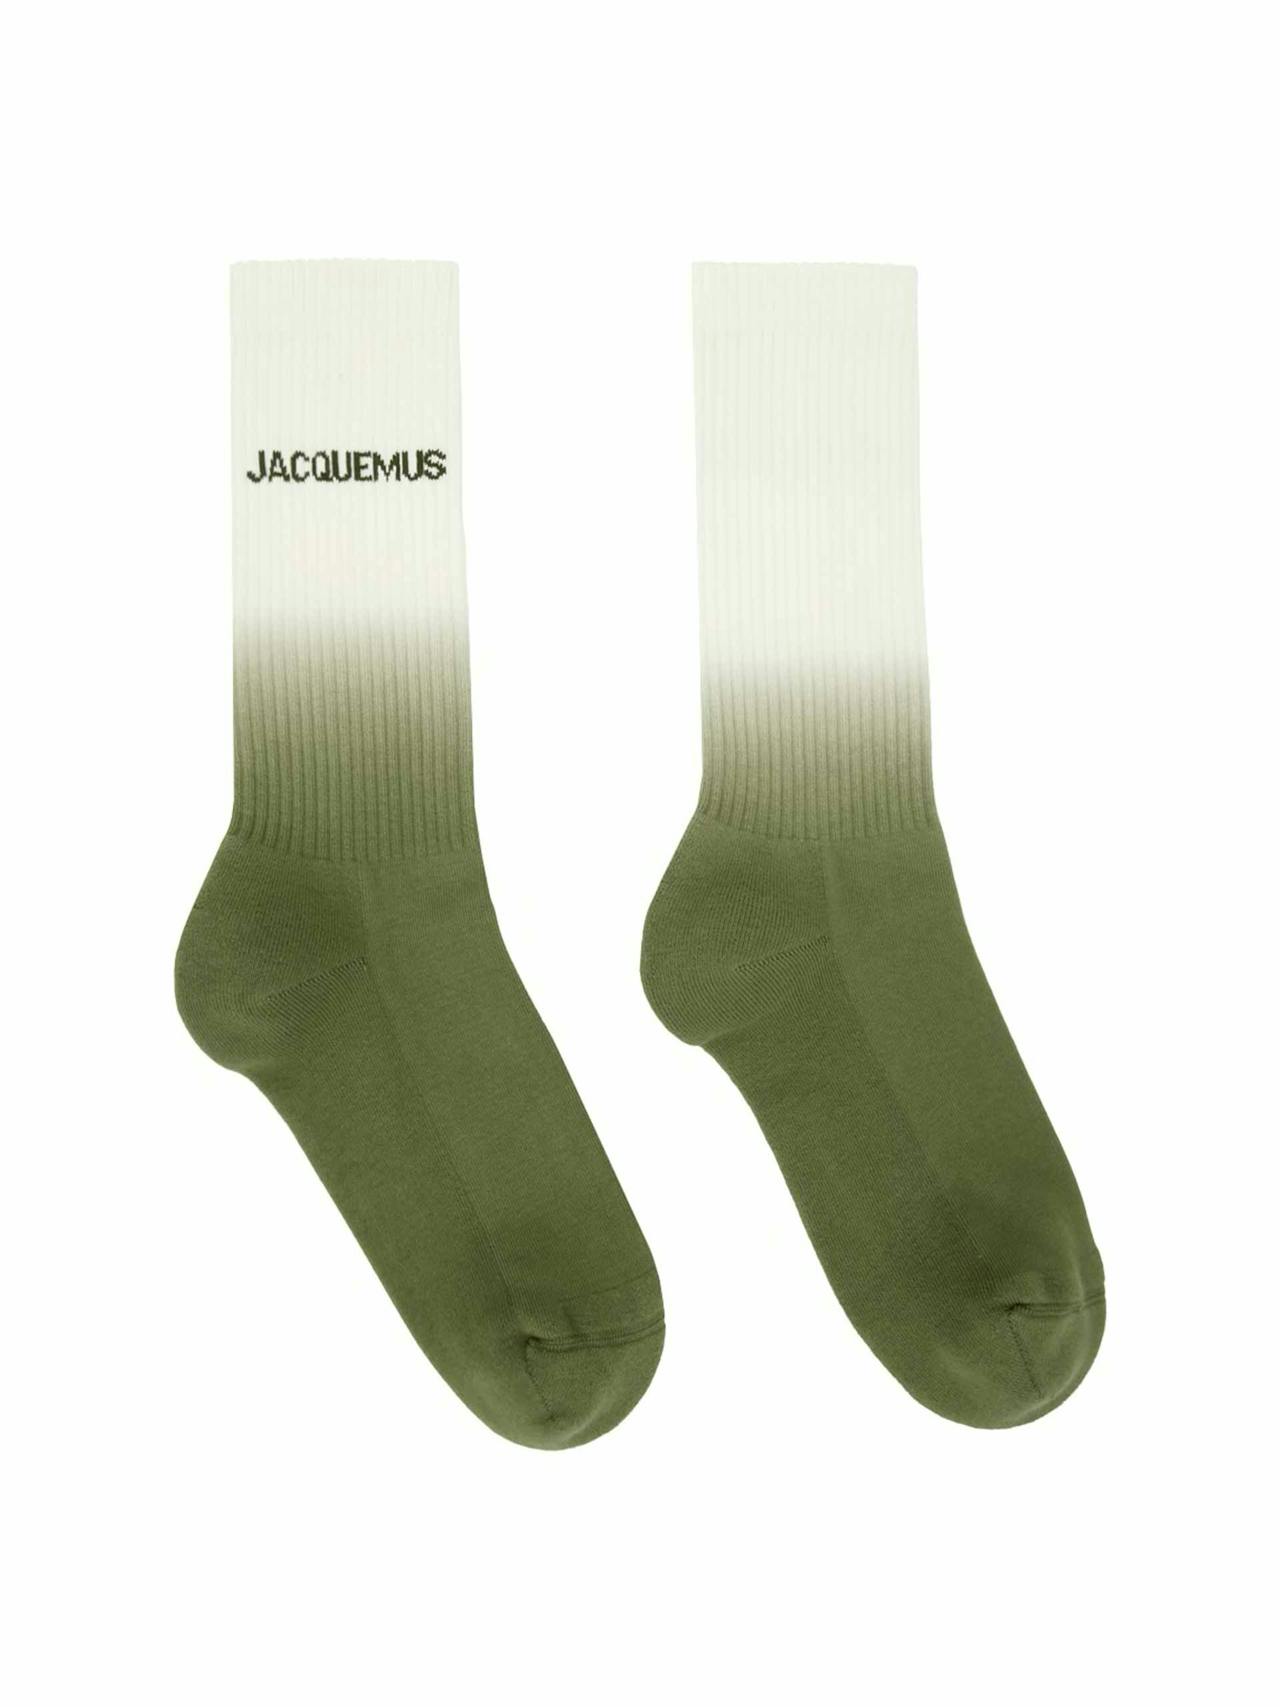 Off-White and green socks